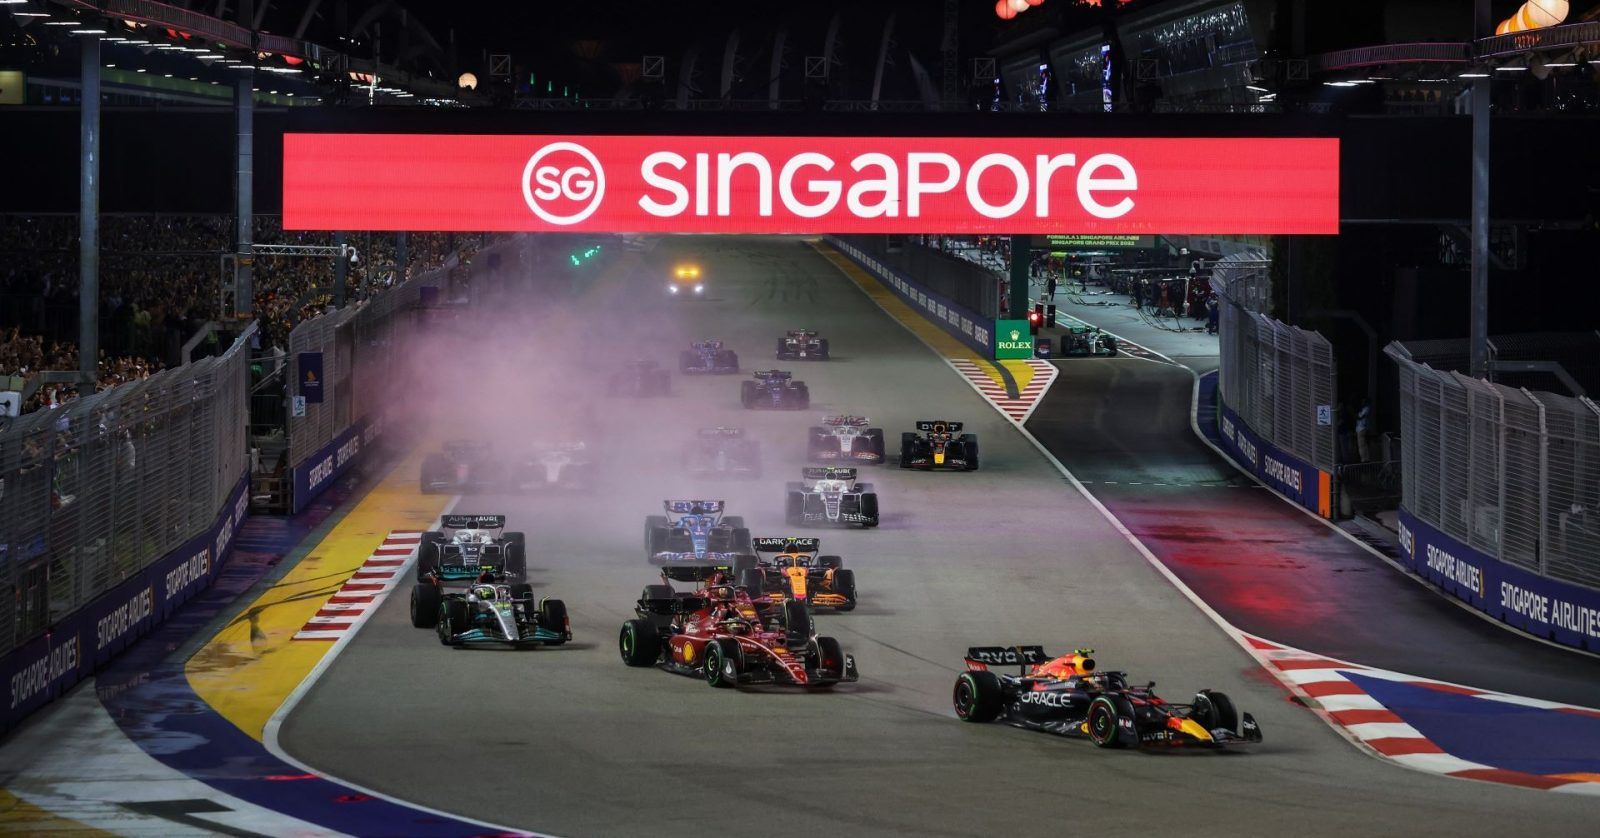 Watch F1 Singapore grand prix 2023 live at these 9 bars showing the race